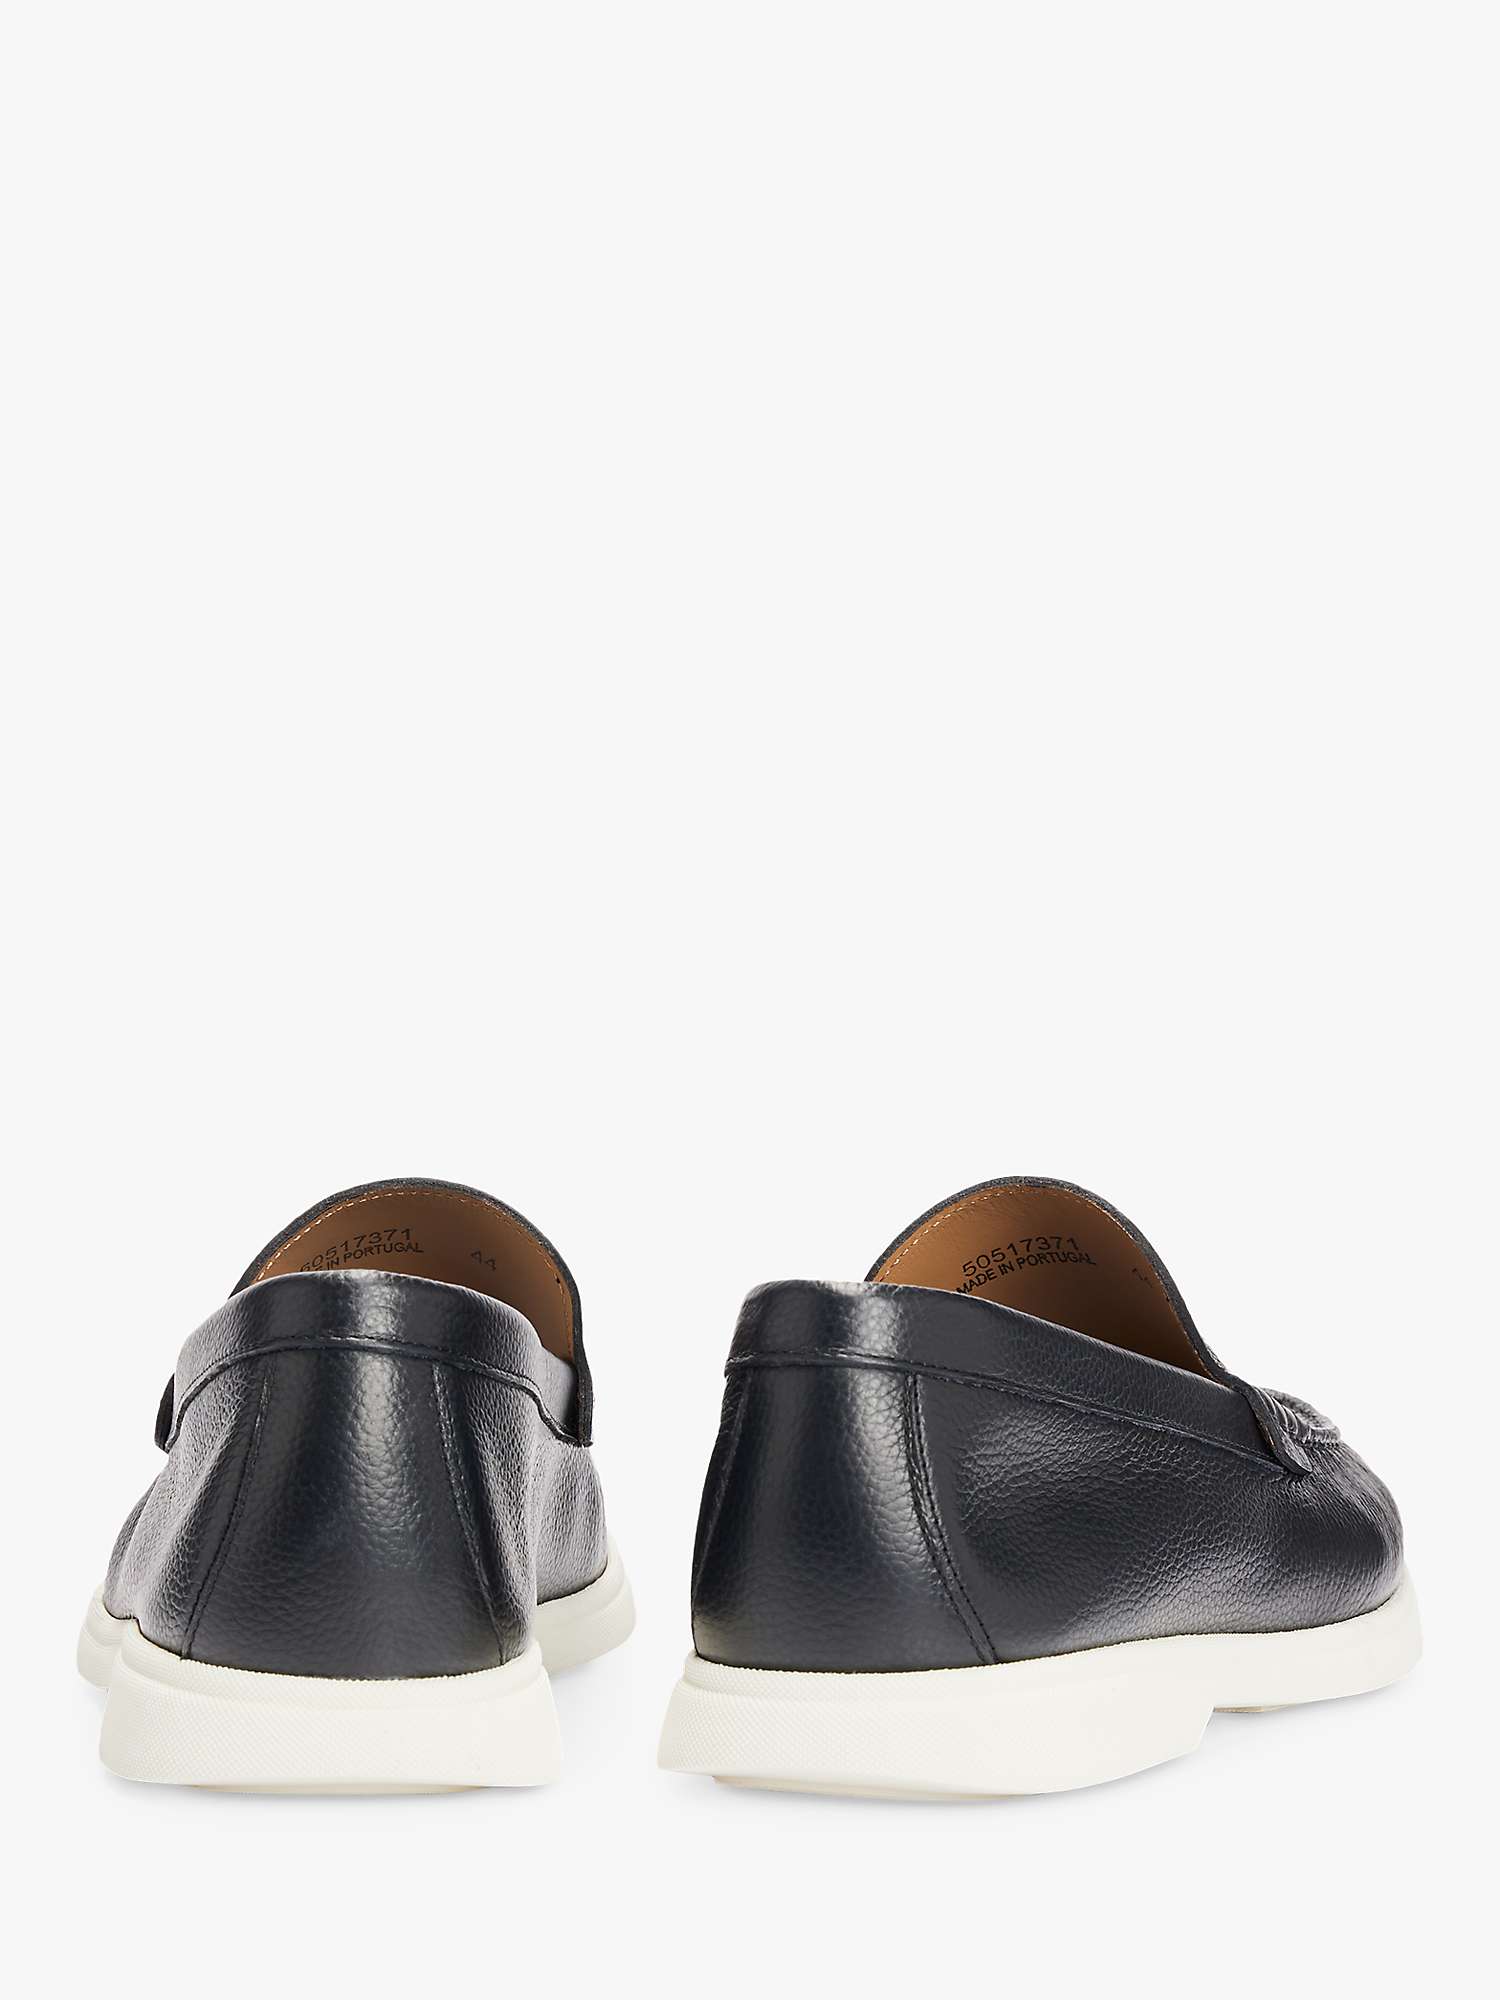 Buy BOSS Sienne Leather Moccasin Loafers Online at johnlewis.com